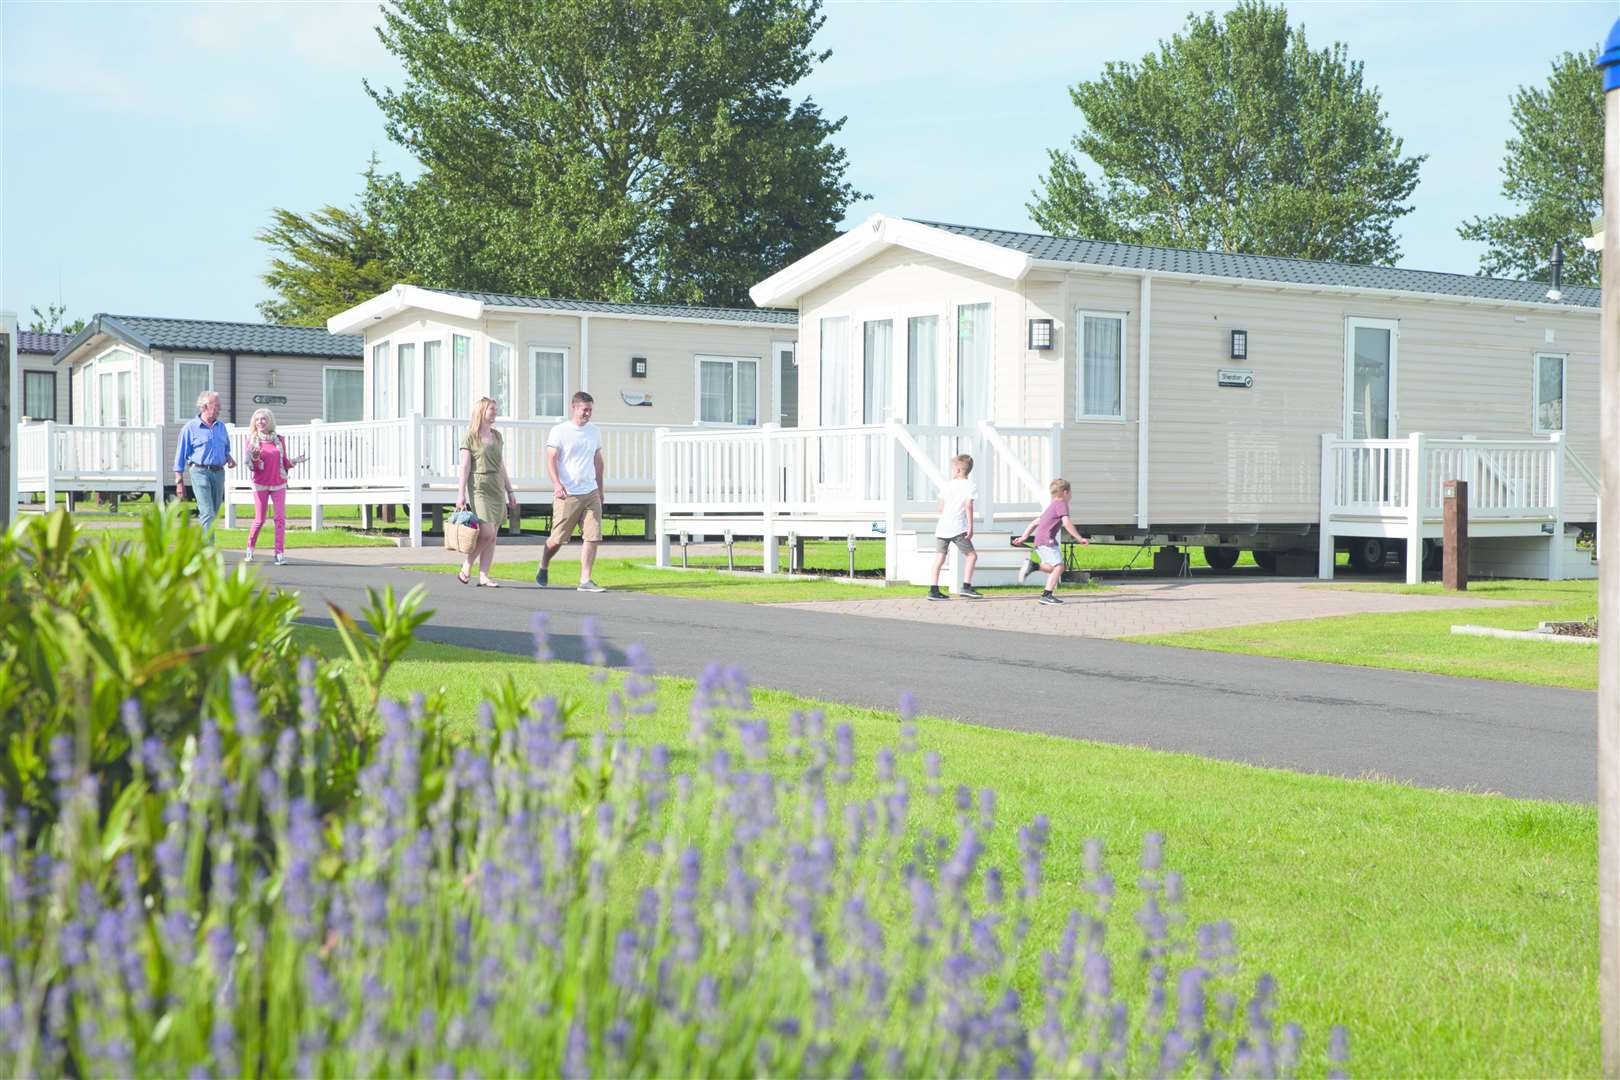 There are 36 Haven holiday parks to choose from